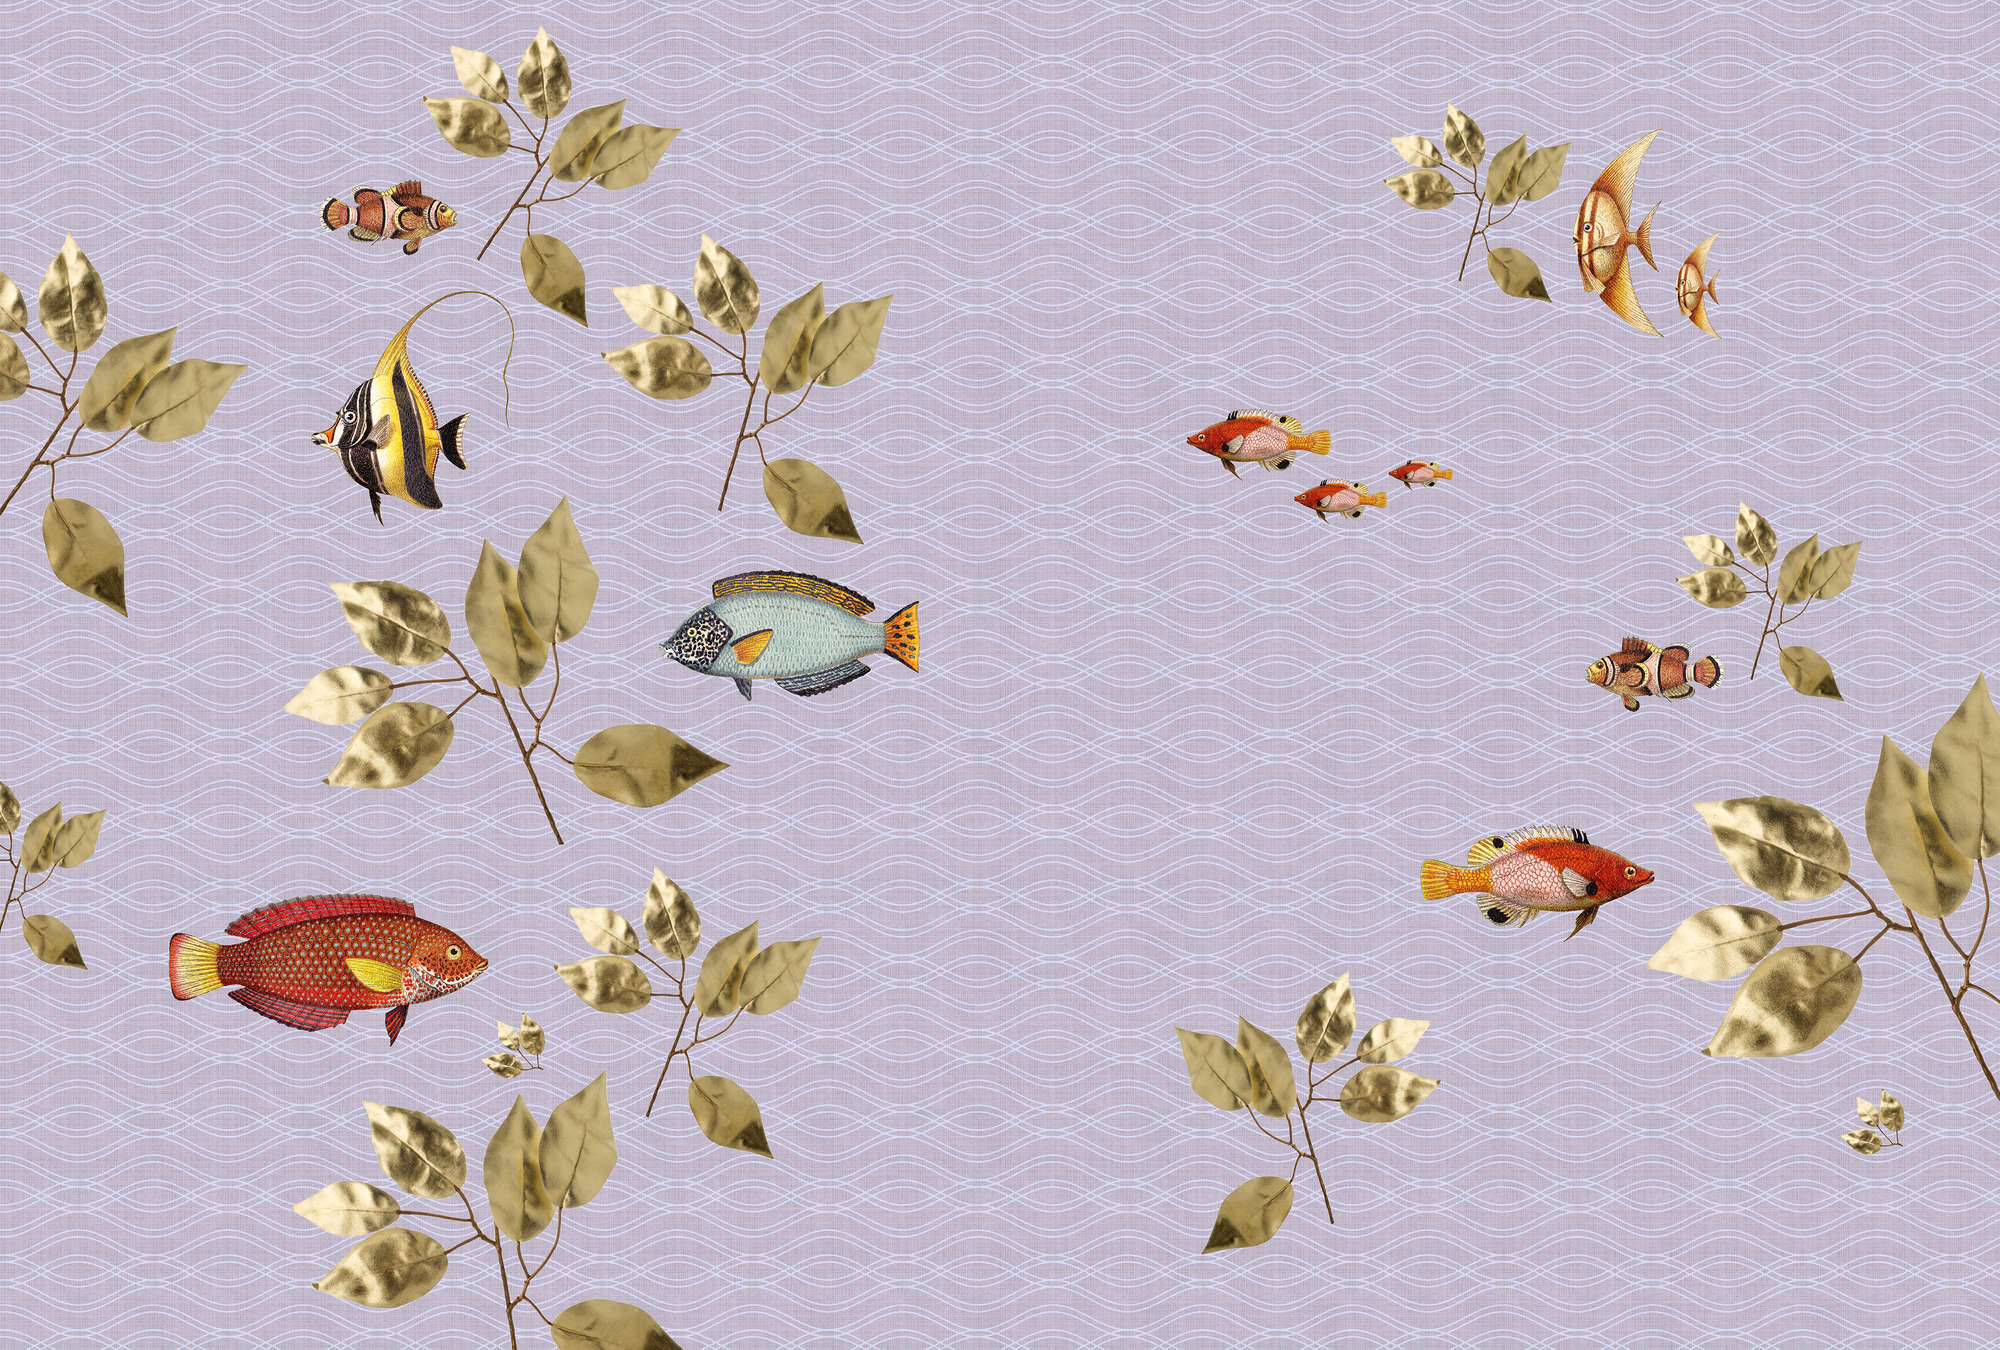             Brilliant fish 2 - Fish wallpaper in natural linen structure with modern style mix - Violet | Matt smooth fleece
        